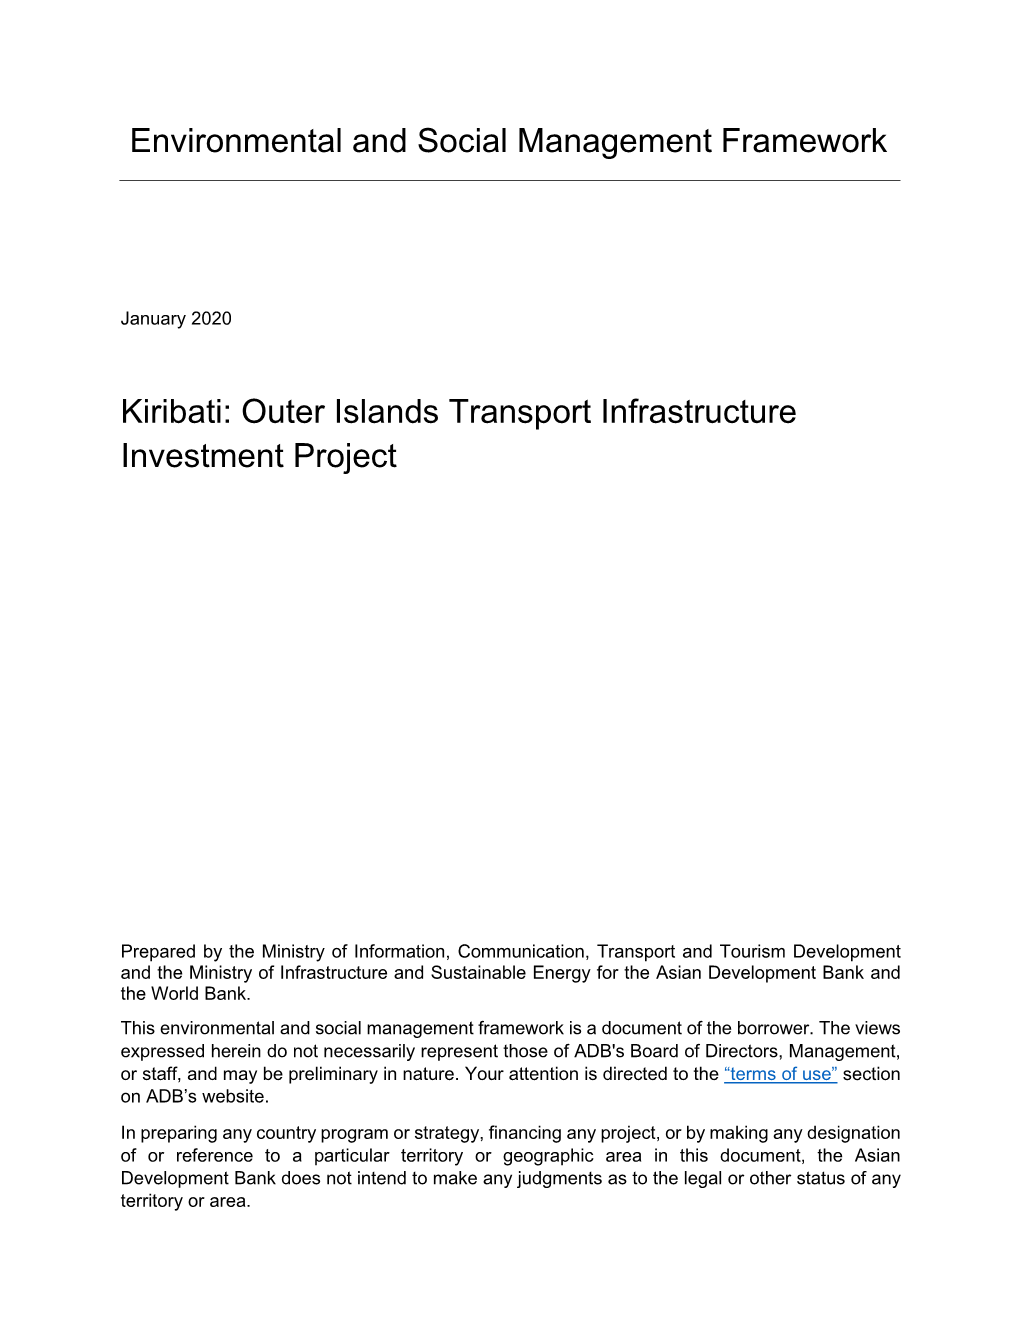 Outer Islands Transport Infrastructure Investment Project